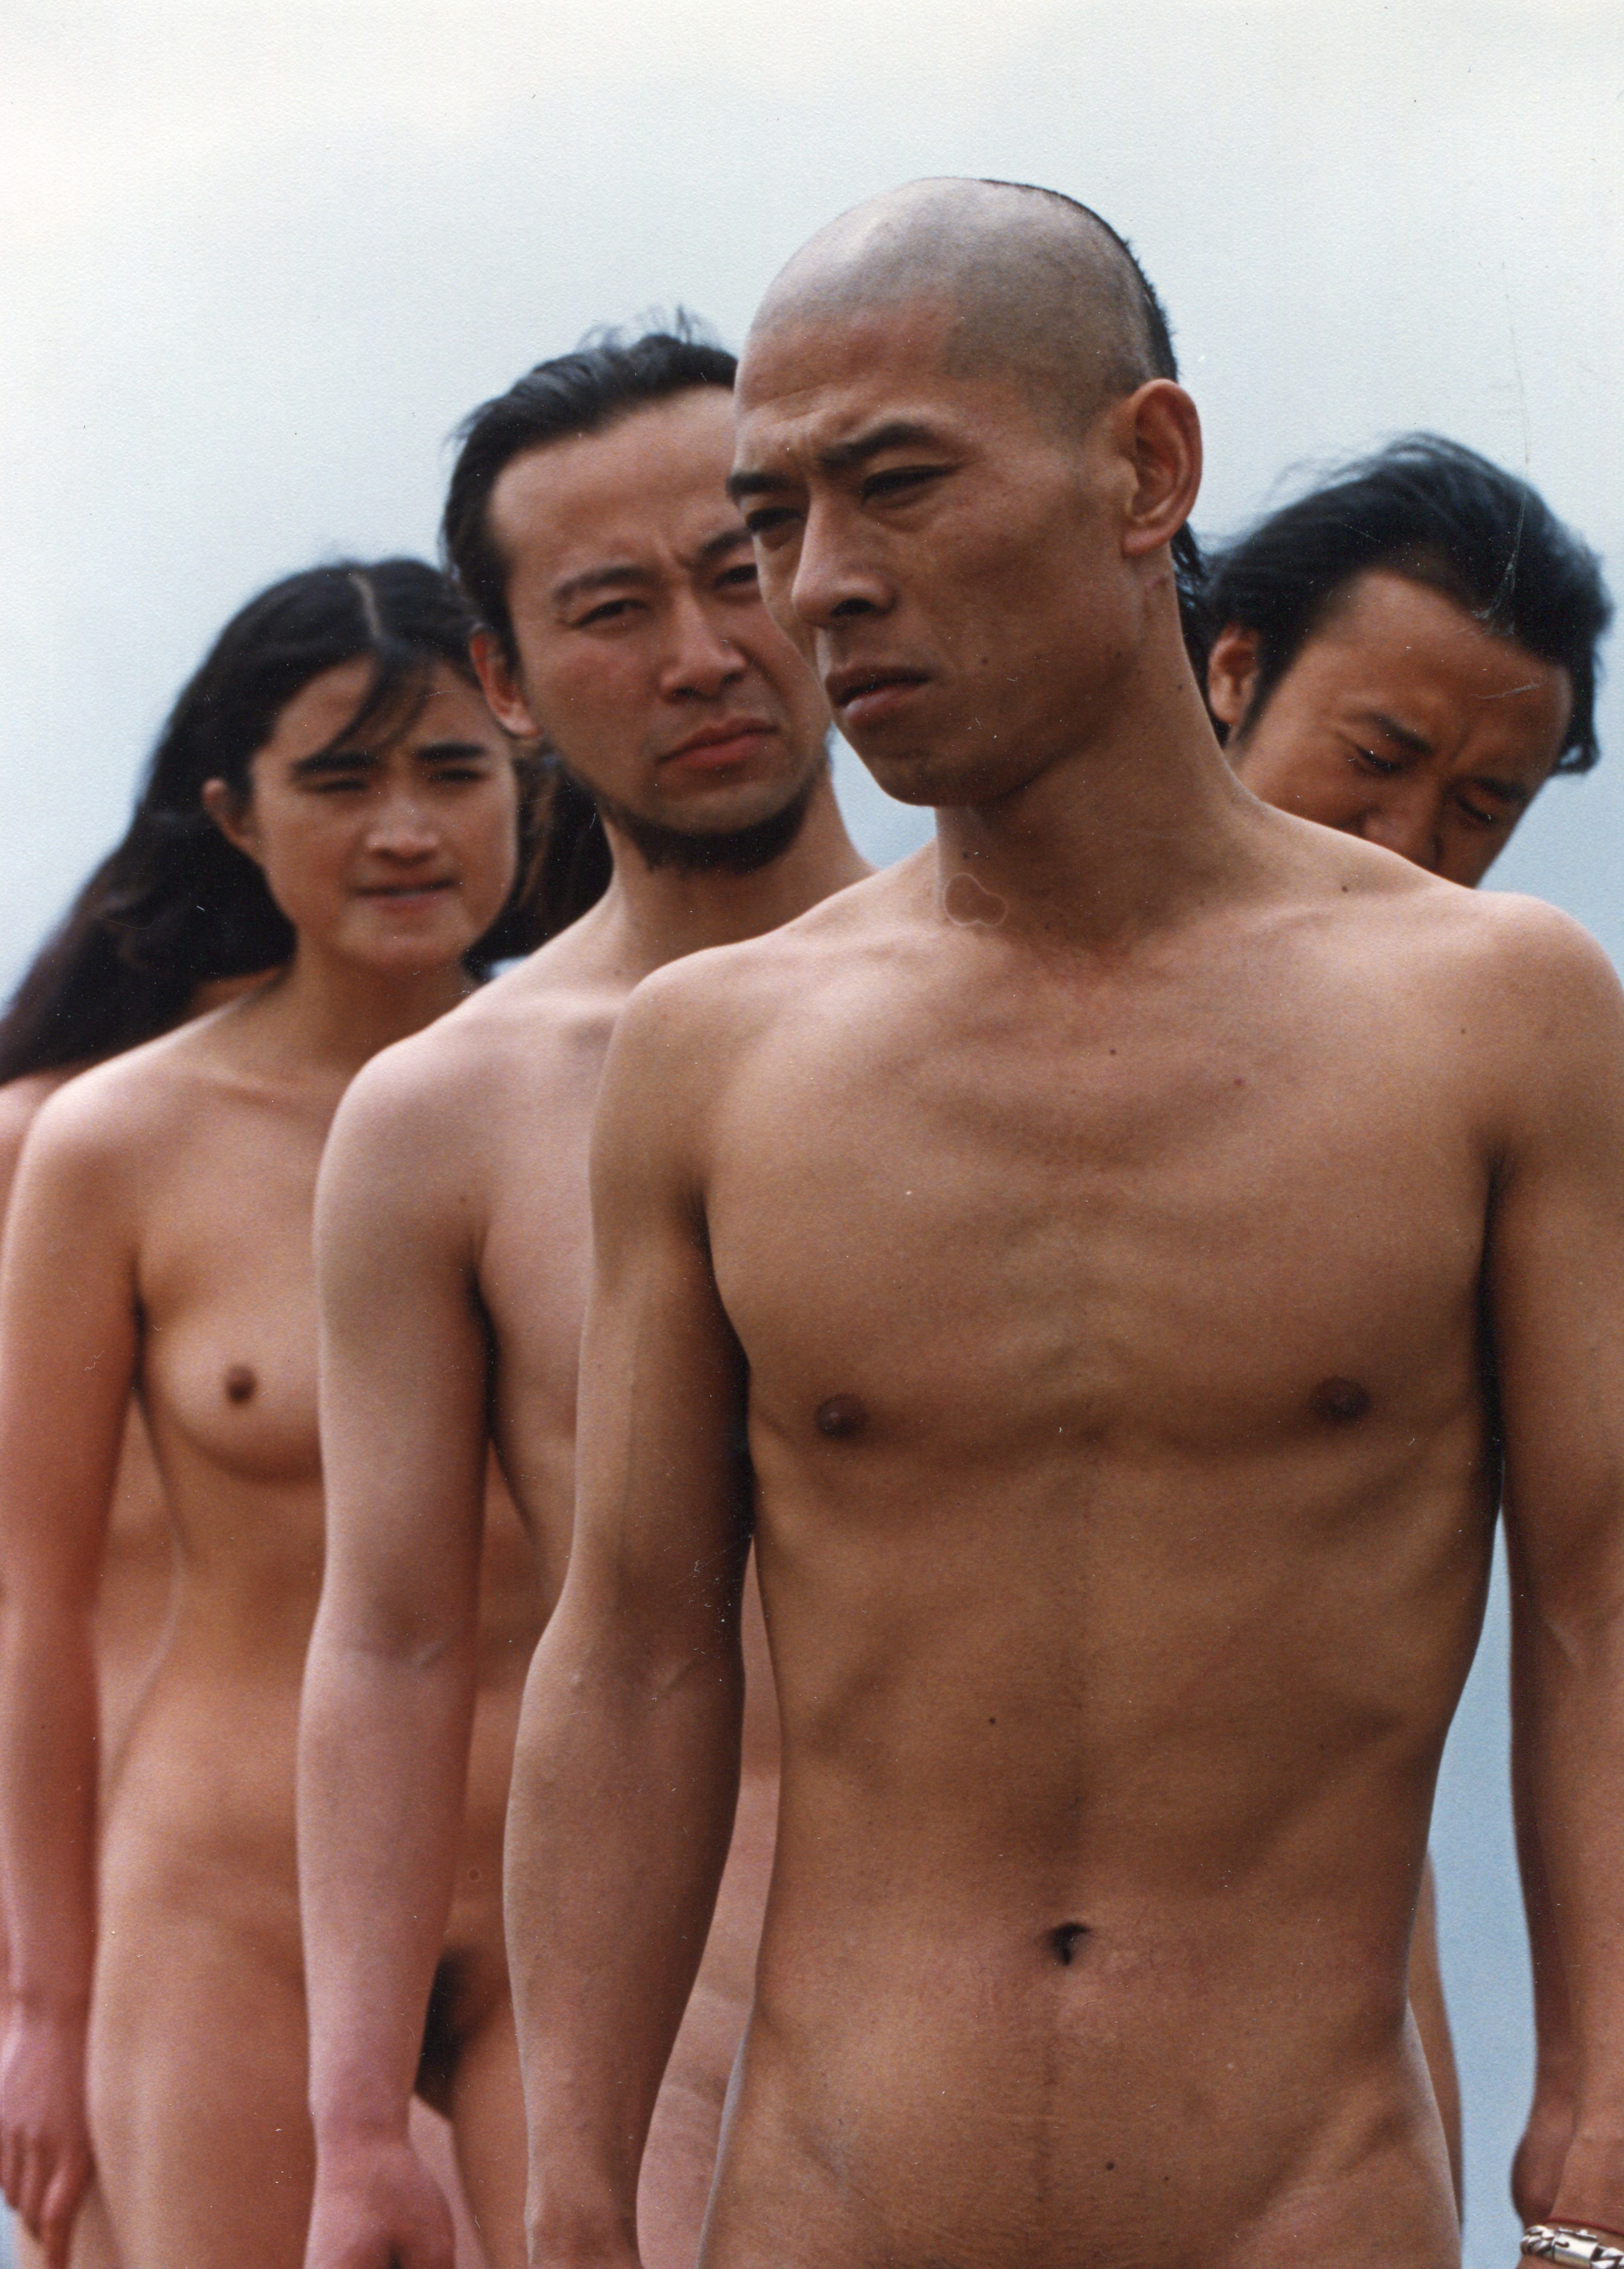 Zhang Huan's iconic performance: A small mountain of naked people